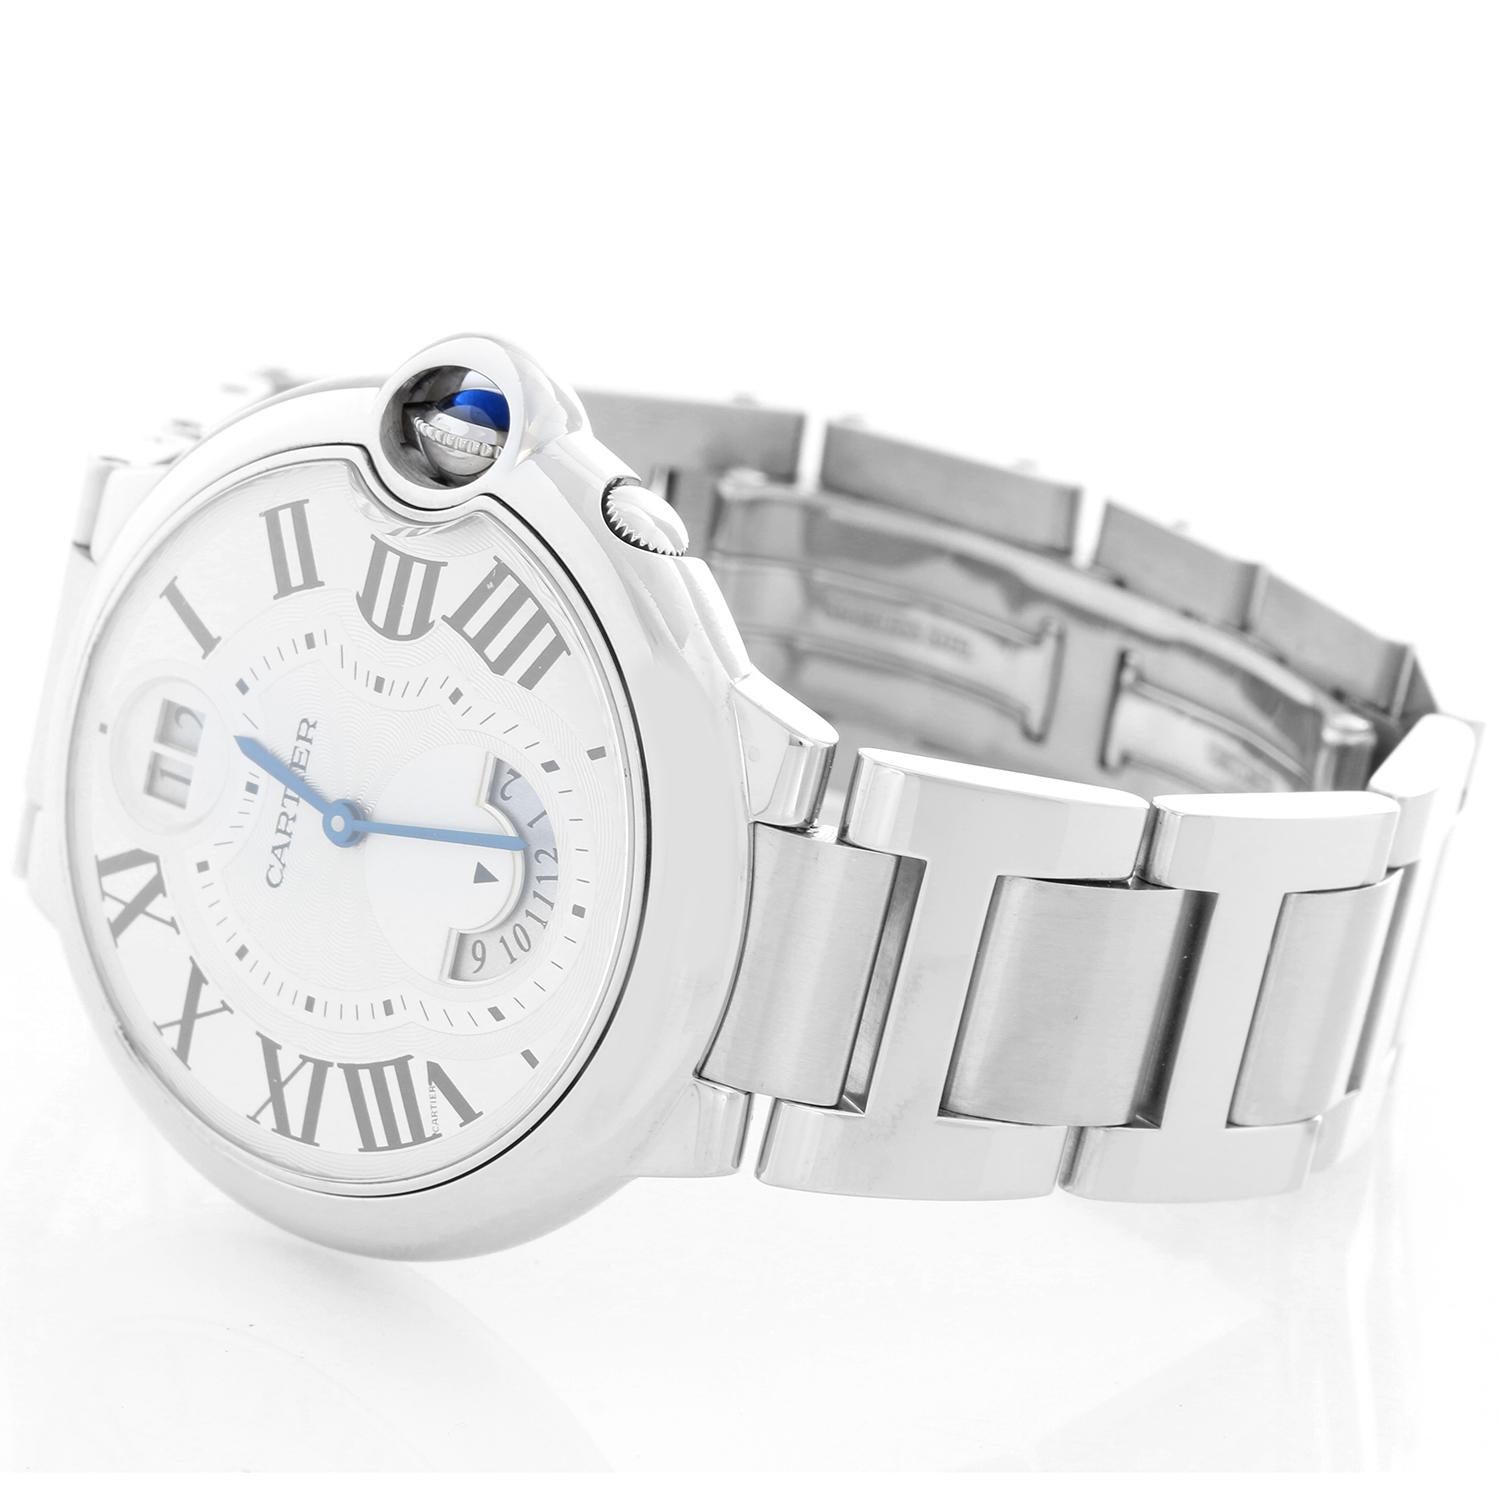 Cartier Ballon Bleu Two Timezone Midsize Stainless Steel Watch W6920011 - Quartz. Stainless steel case. Silvered opaline dial with blue steel hands and Roman numeral hour markers. GMT sub-dial above the 6 o'clock position. Stainless steel Cartier